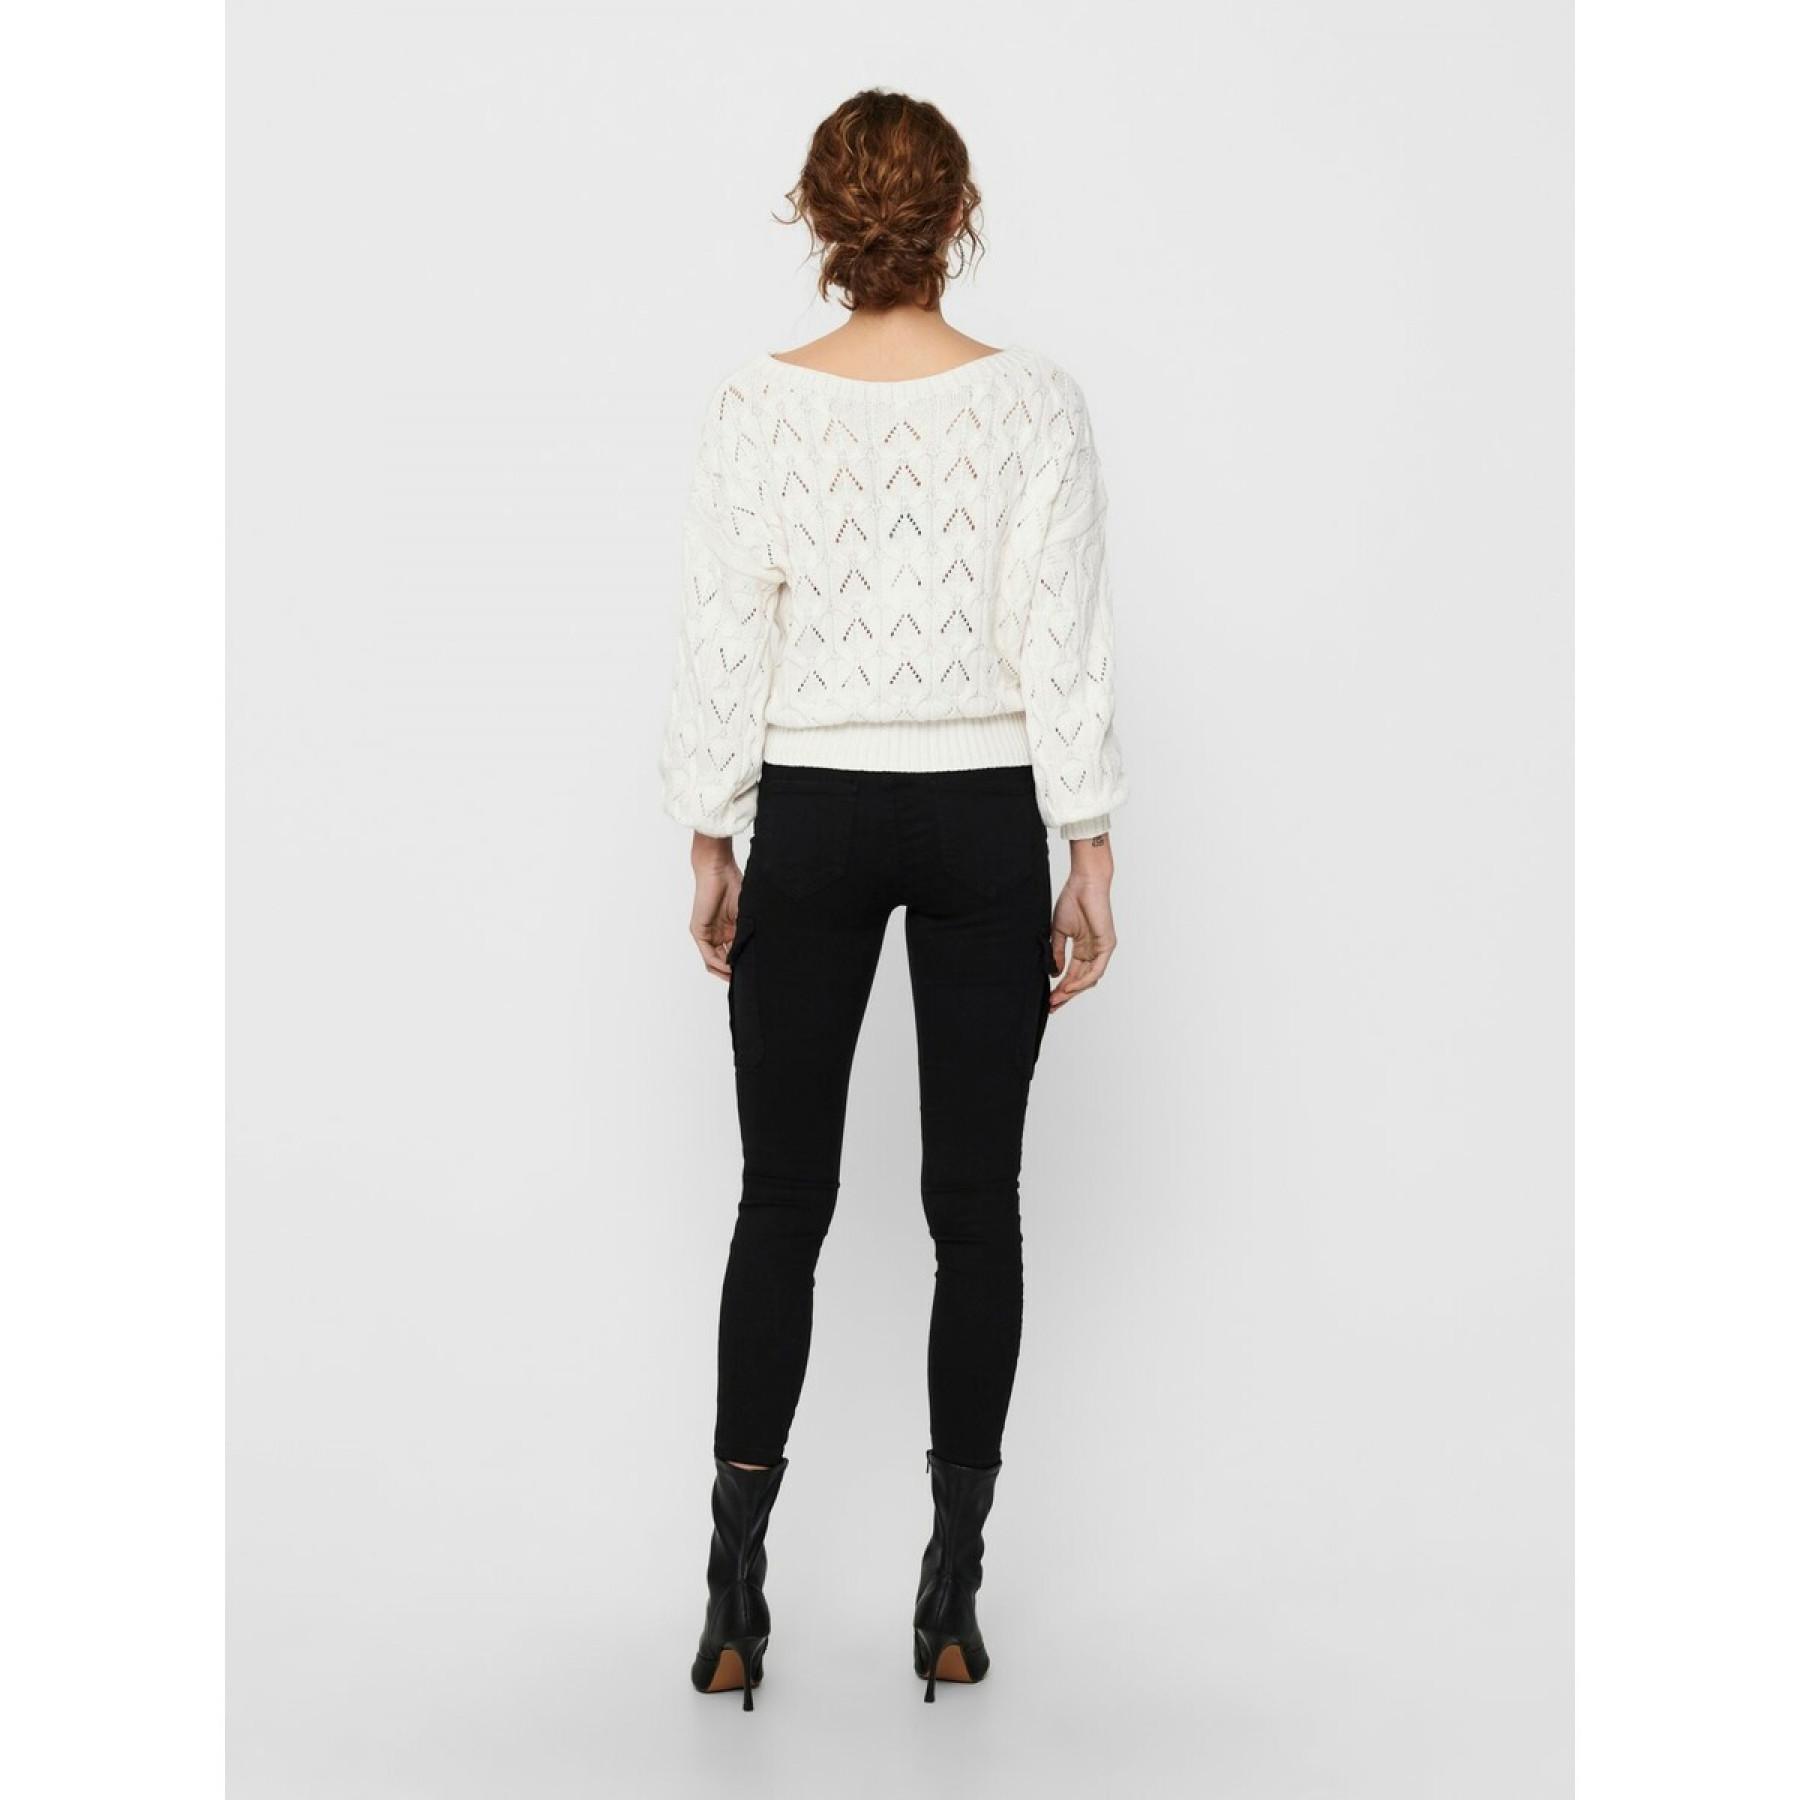 Women's sweater Only Brynn life structure